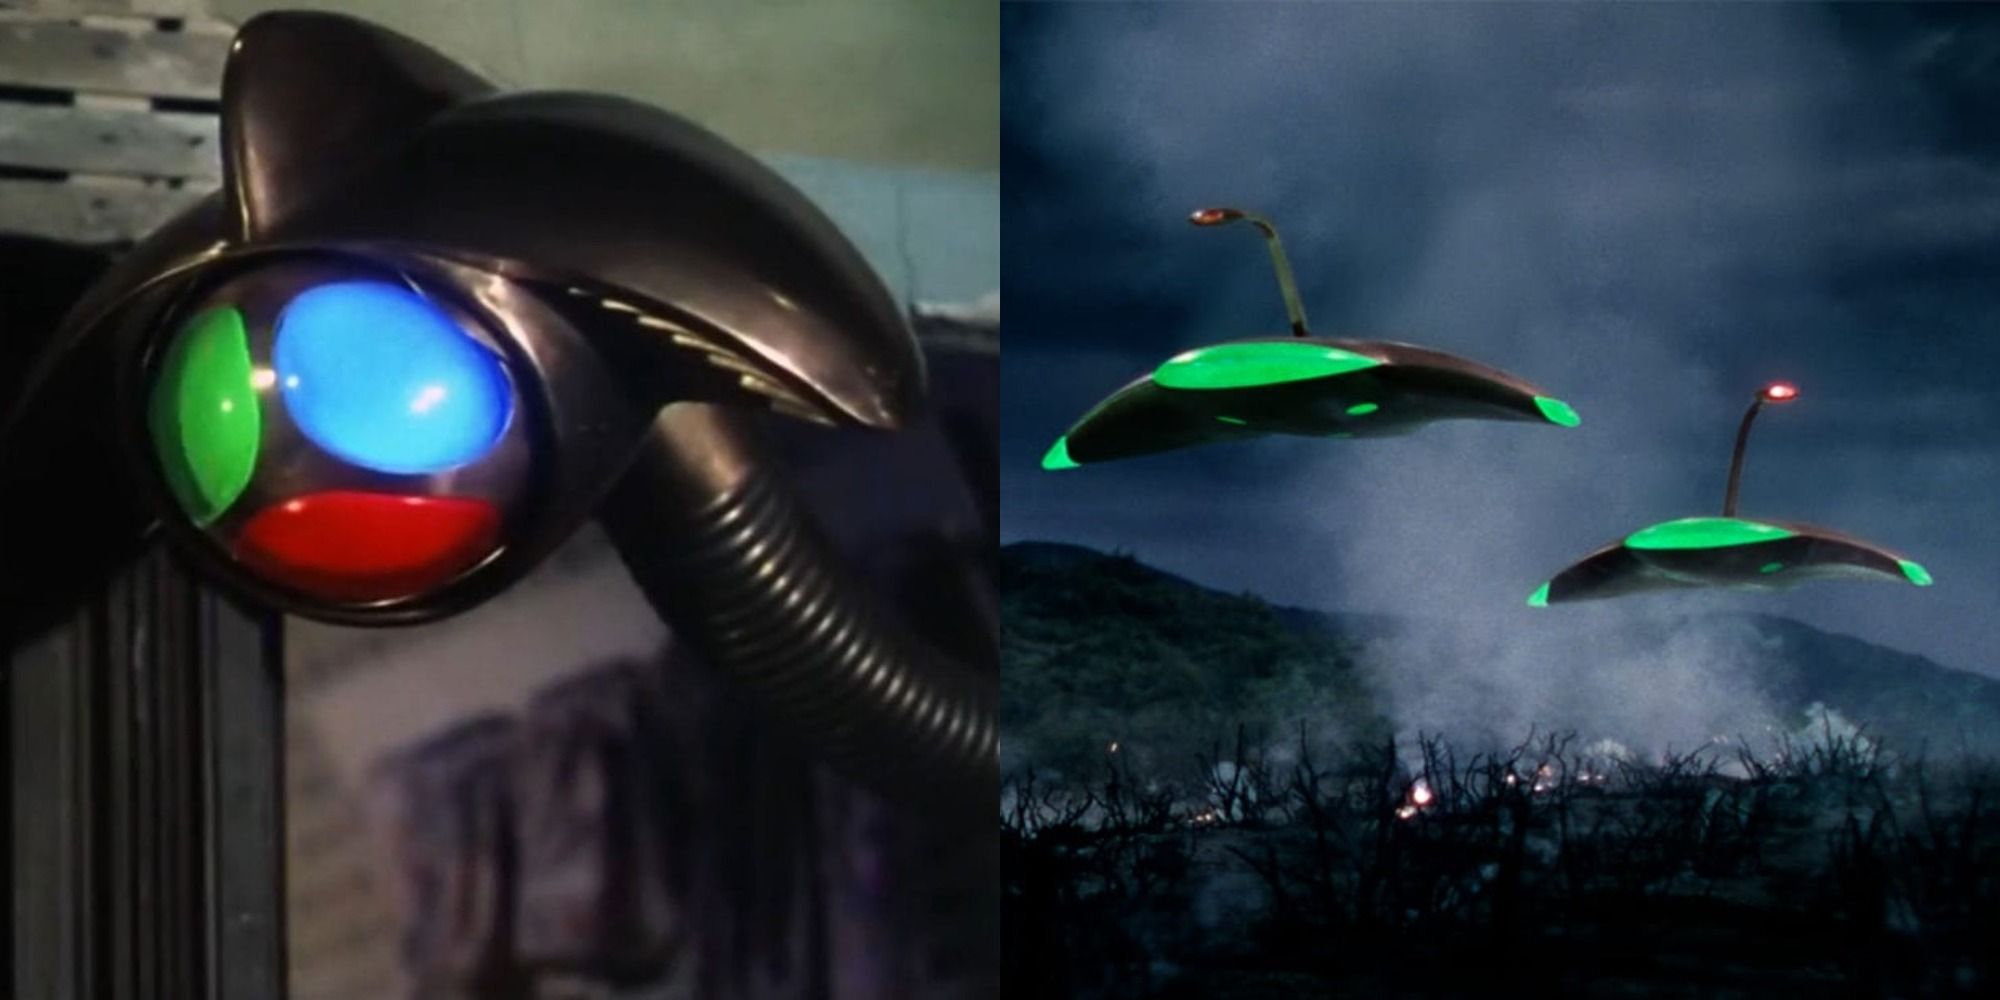 split image war of the worlds ships and alien "arm"